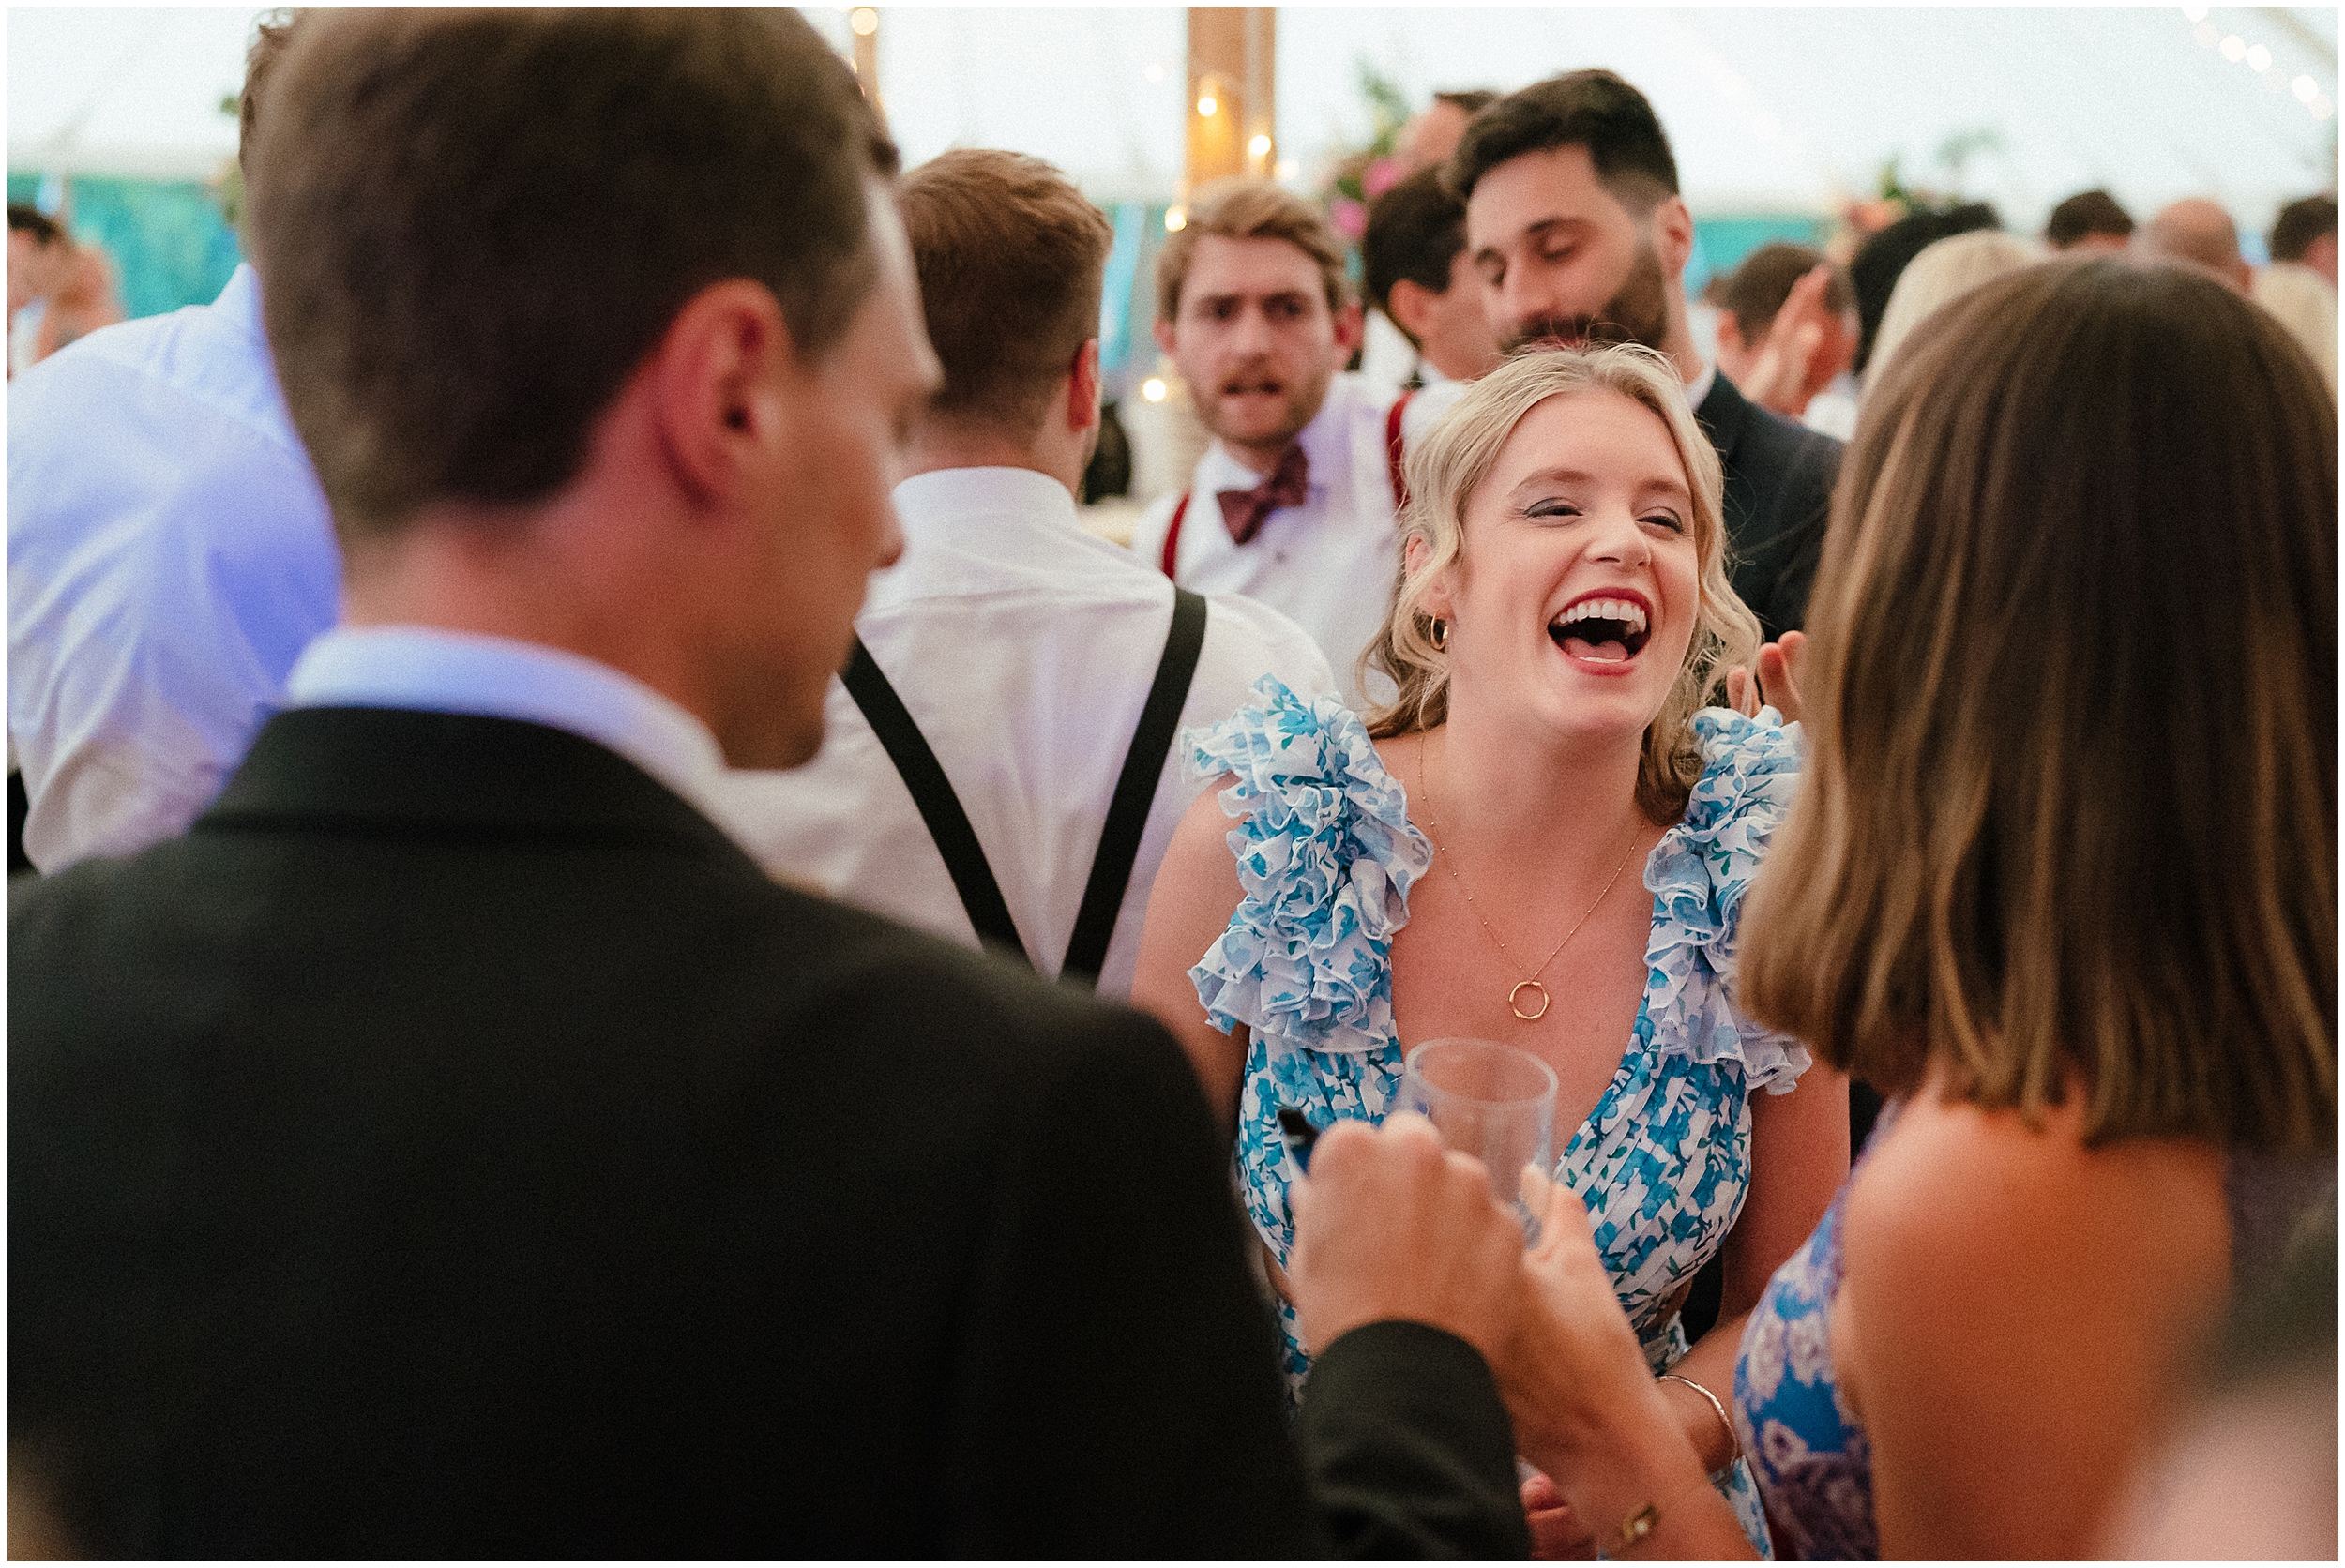 Wedding guests having fun during a wedding at the Old Rectory Estate. 